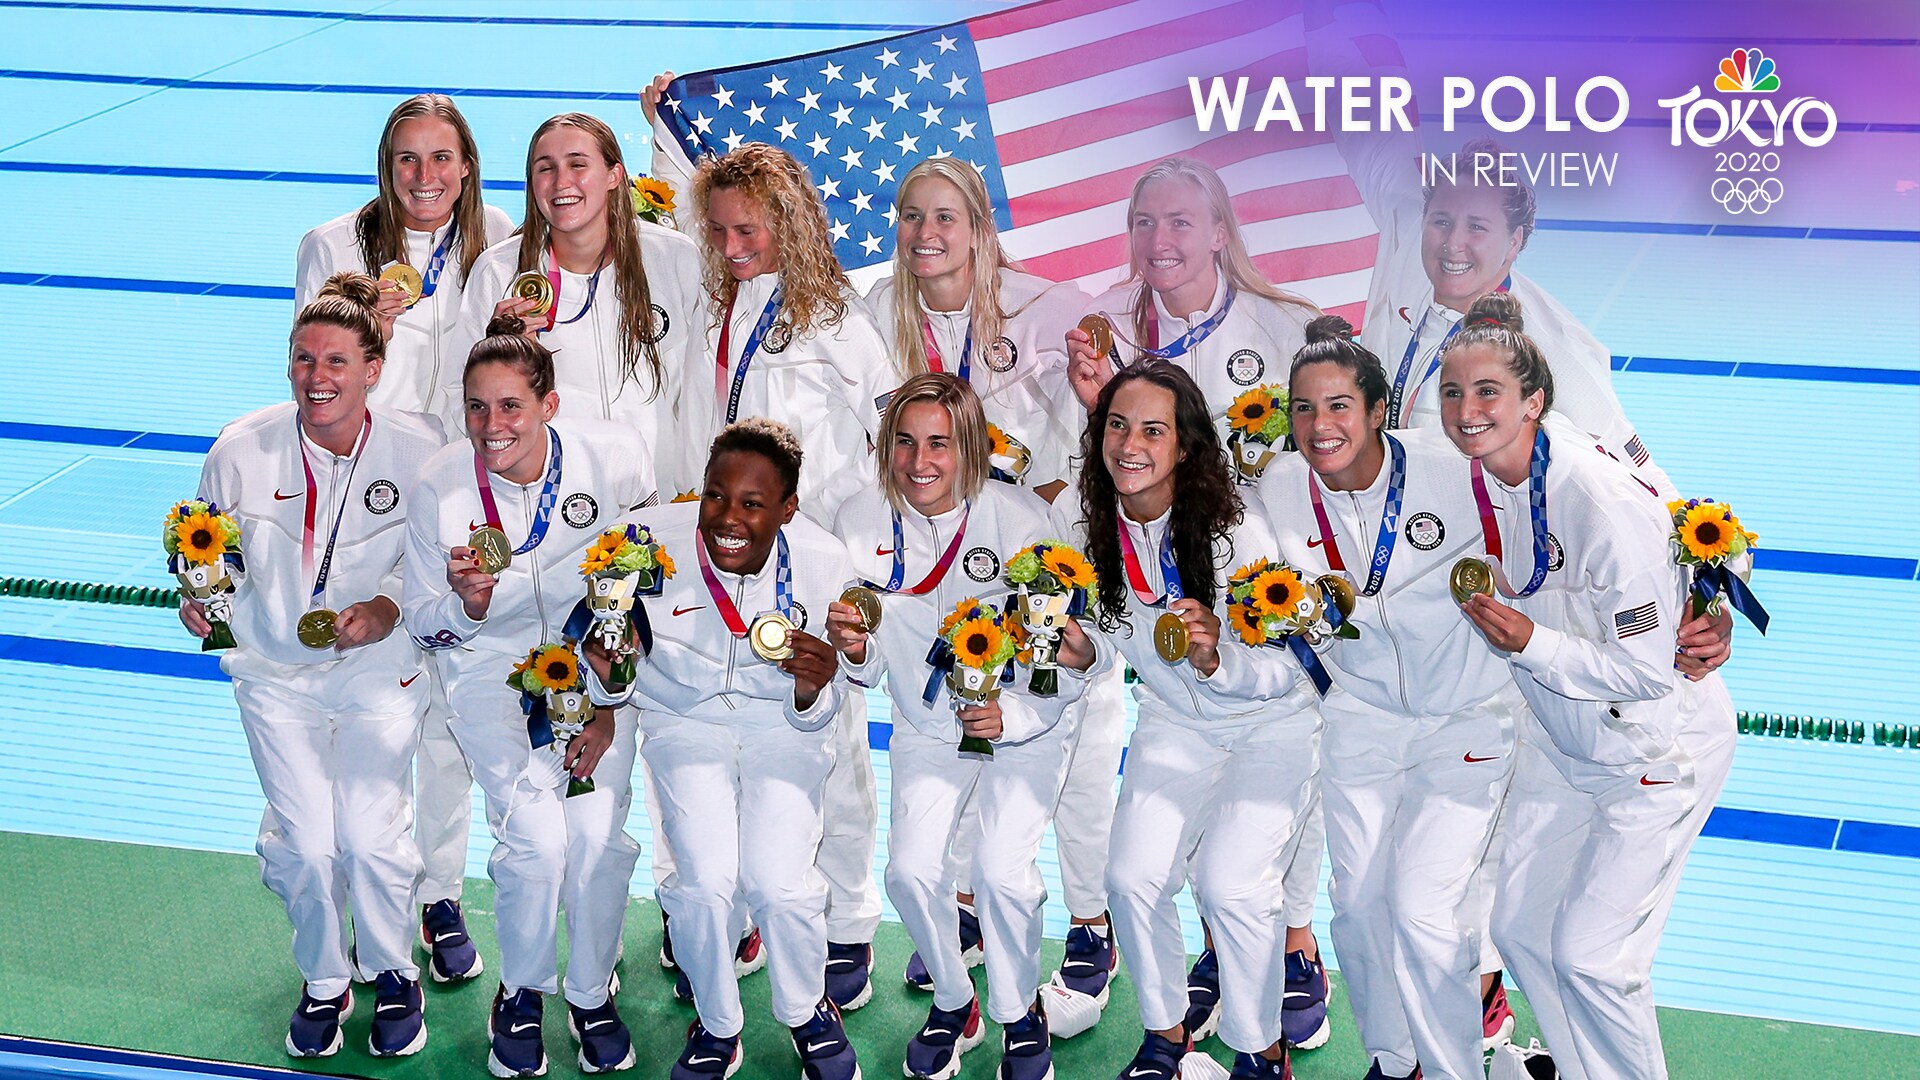 Tokyo Olympics water polo in review: Team USA three-peats, a